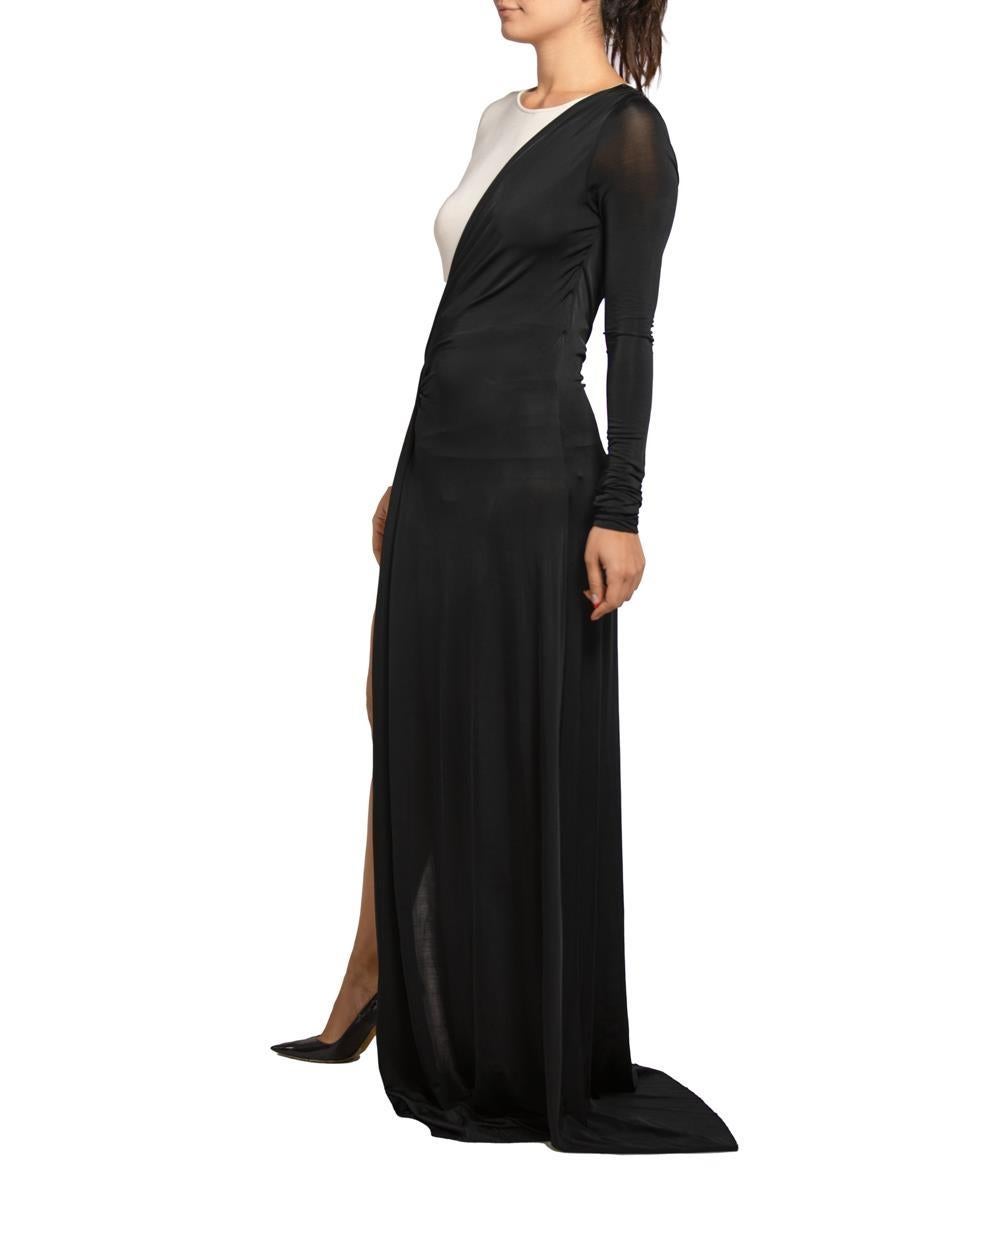 1990S PIERRE BALMAIN Black & White Rayon Jersey Long Sleeved Gown In Excellent Condition For Sale In New York, NY